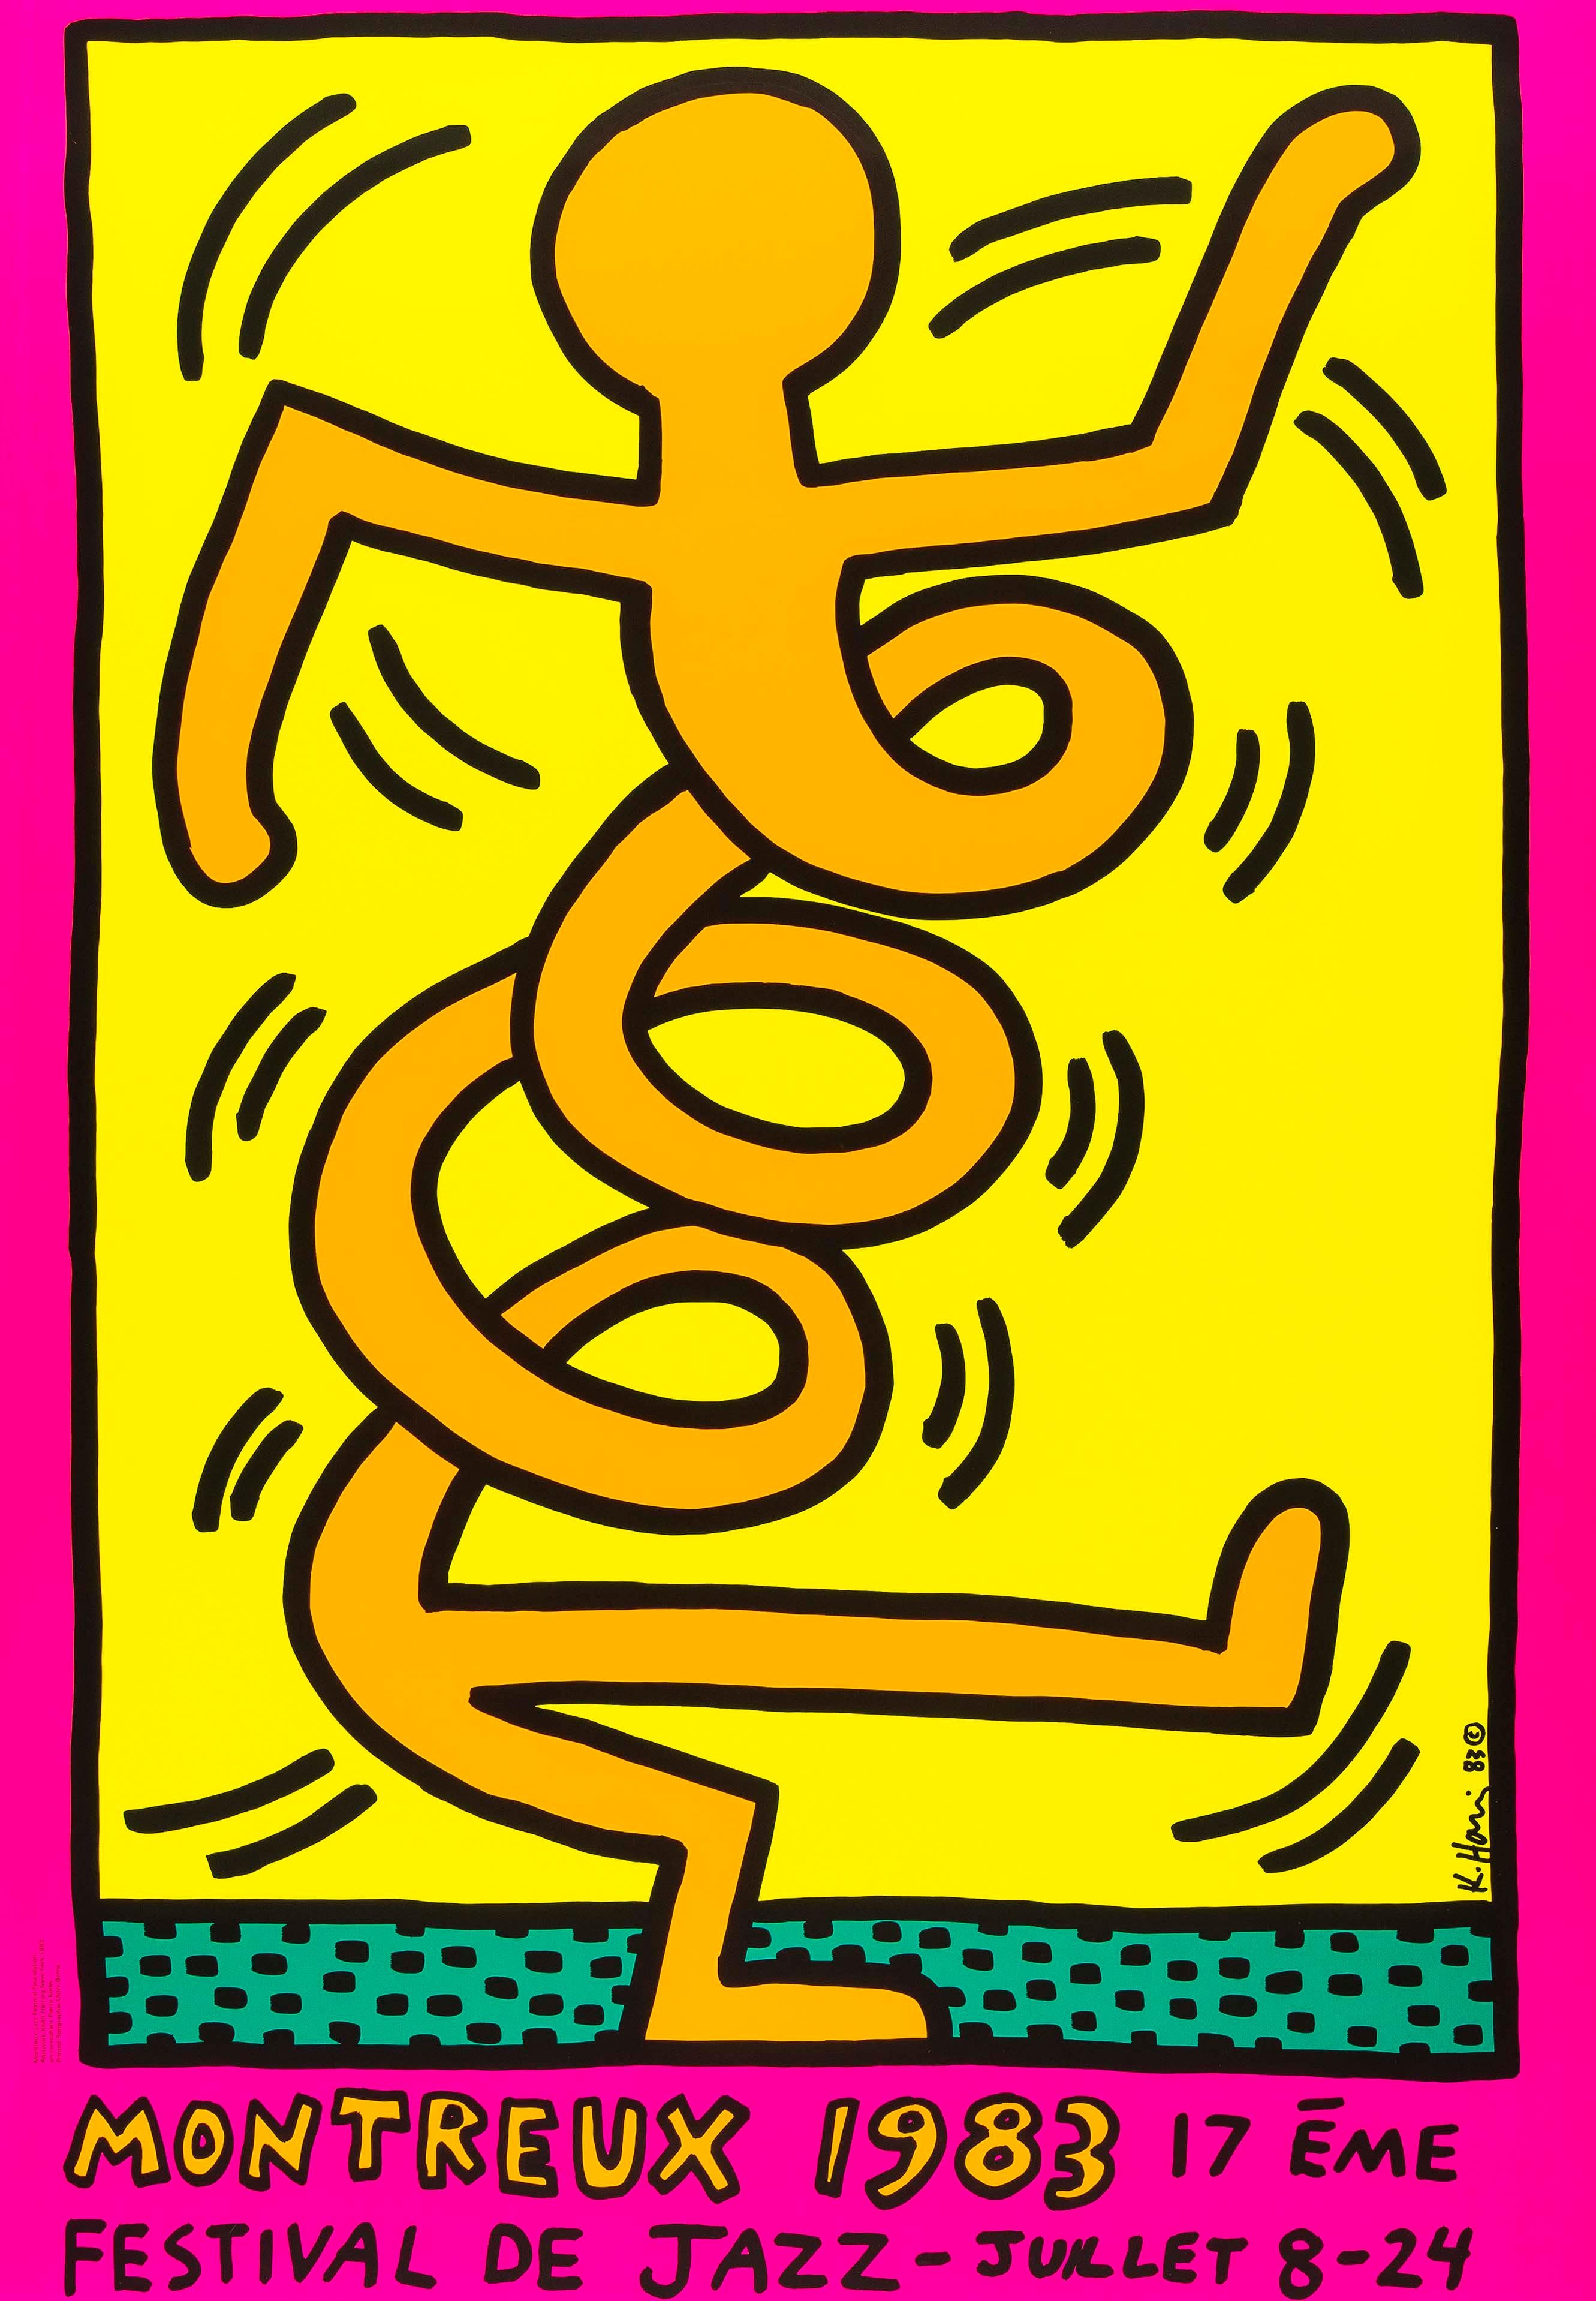 KEITH HARING
Montreux Jazz Festival, 1983
Screenprint in colours, on wove
Printed by Serigraphie Uldry Bern, Switzerland
Published for the Montreux Jazz Festival
Sheet:  100.0 × 70.0 cm (39.4 x 27.5 in)
